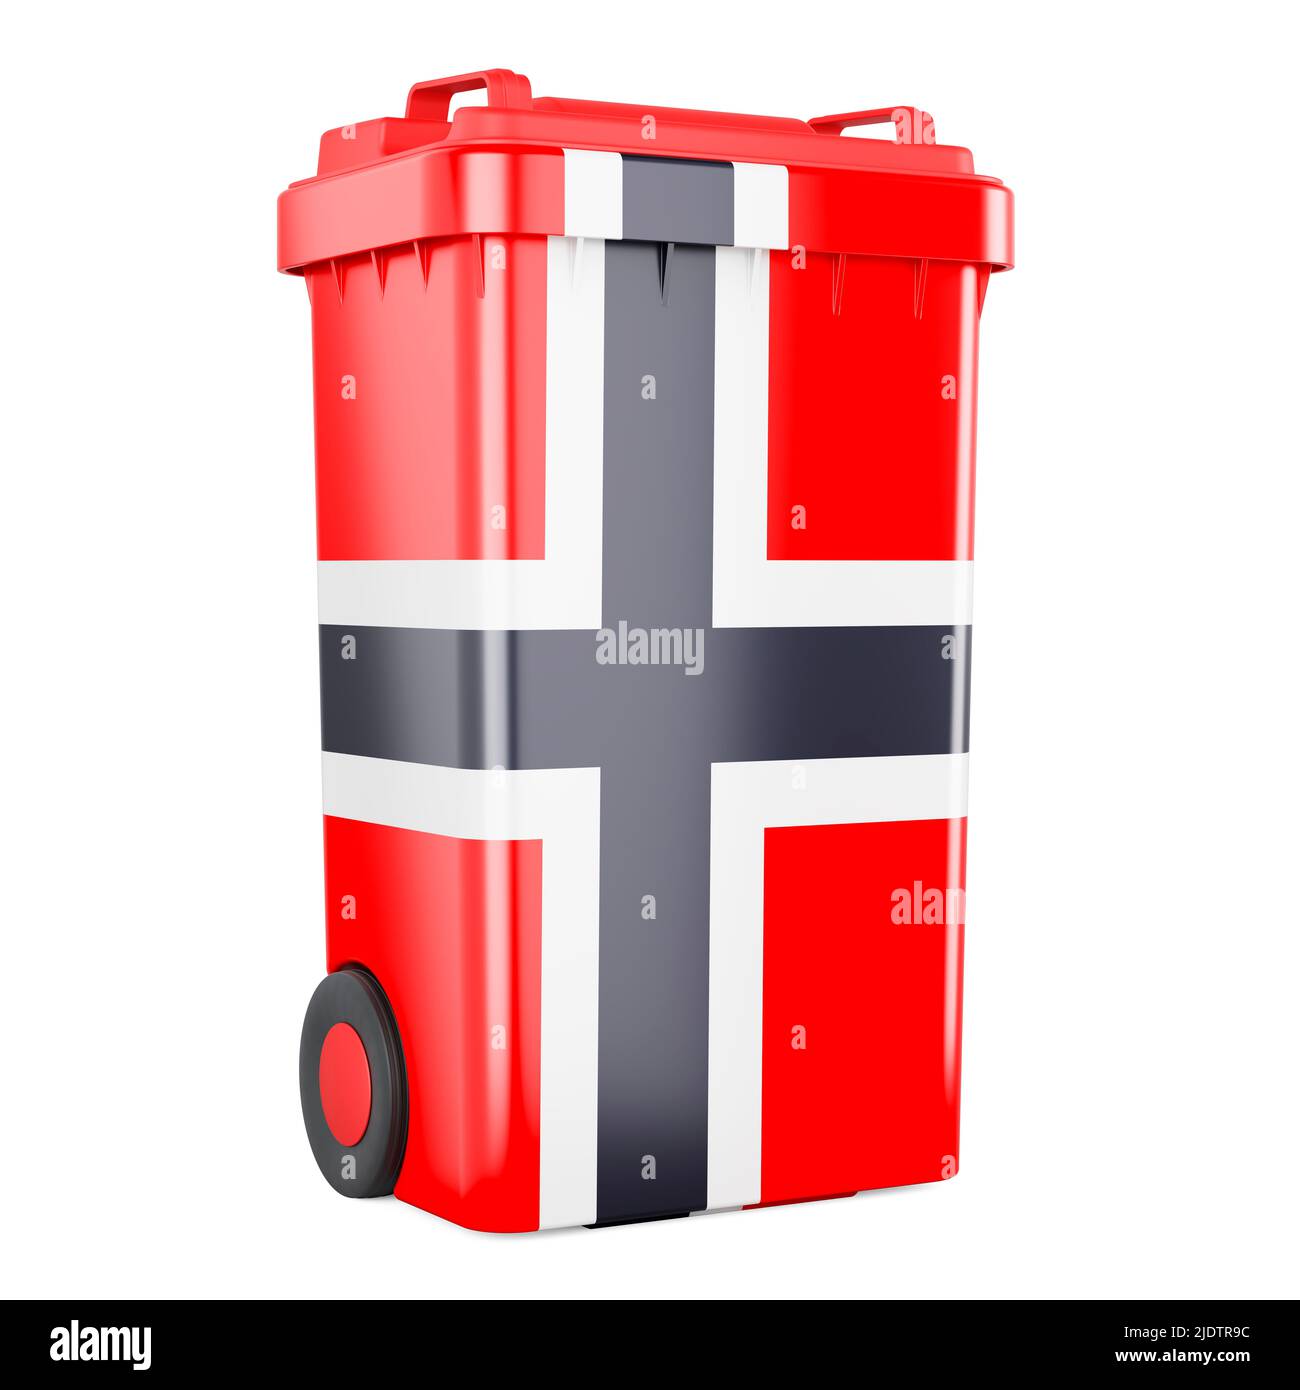 Waste container with Norwegian flag, 3D rendering isolated on white background Stock Photo